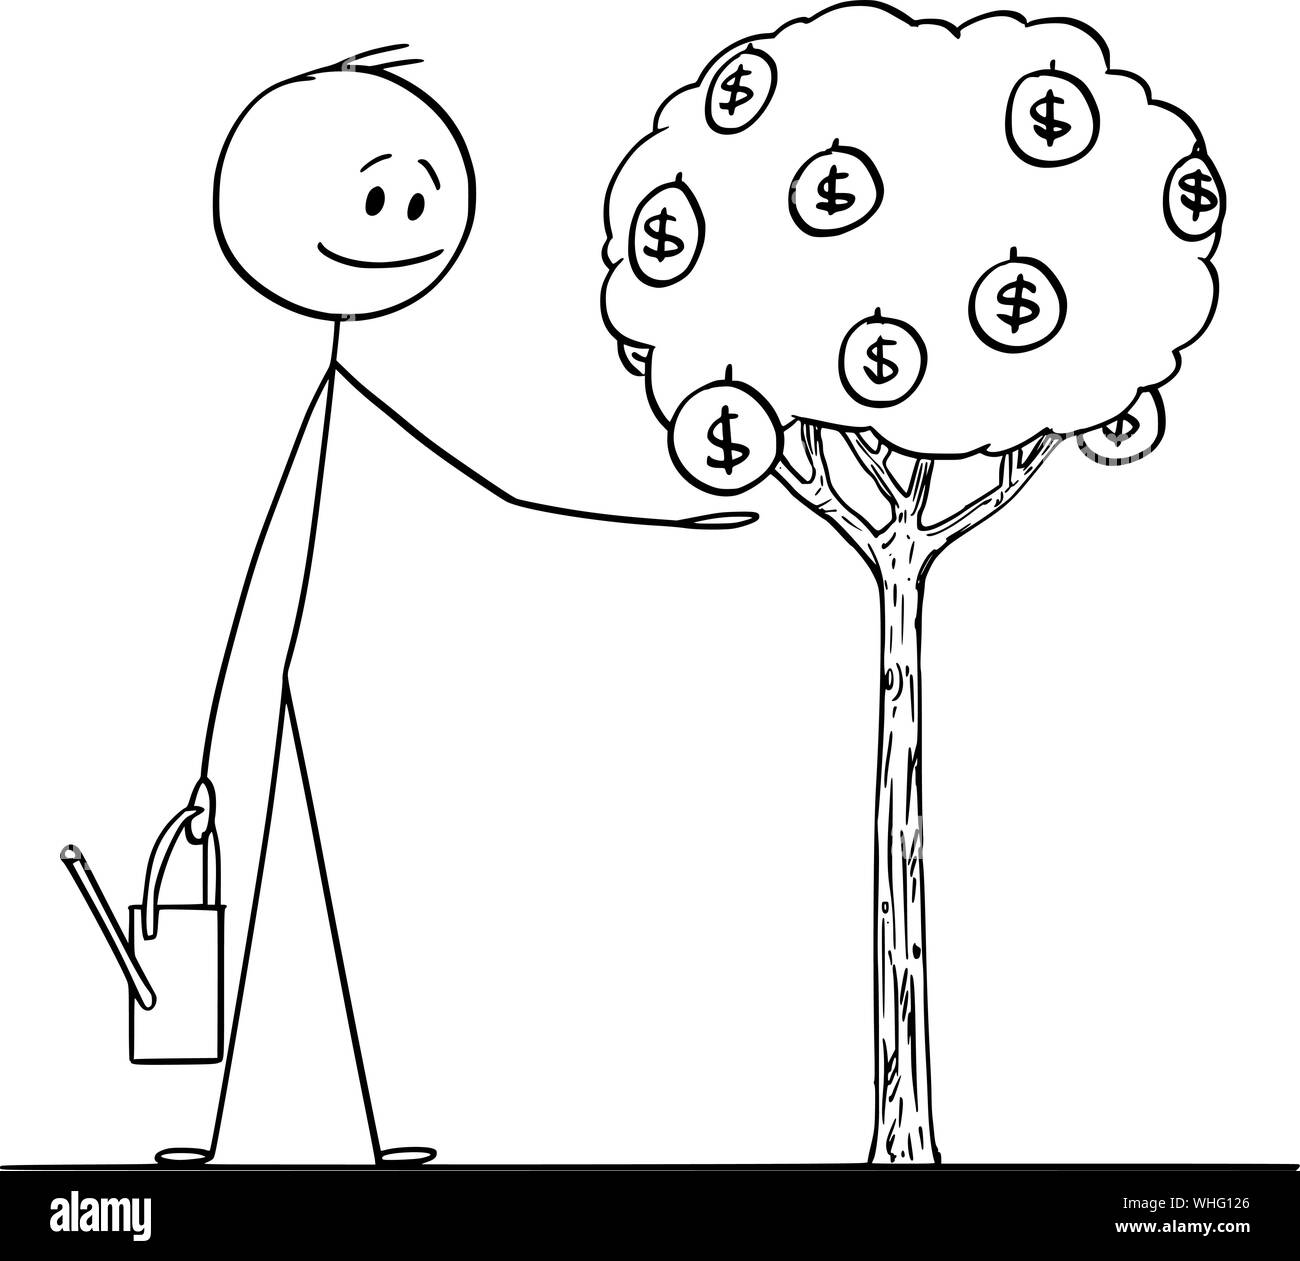 Vector cartoon stick figure drawing conceptual illustration of man or businessman watering small tree with money fruit with dollar symbol. Stock Vector